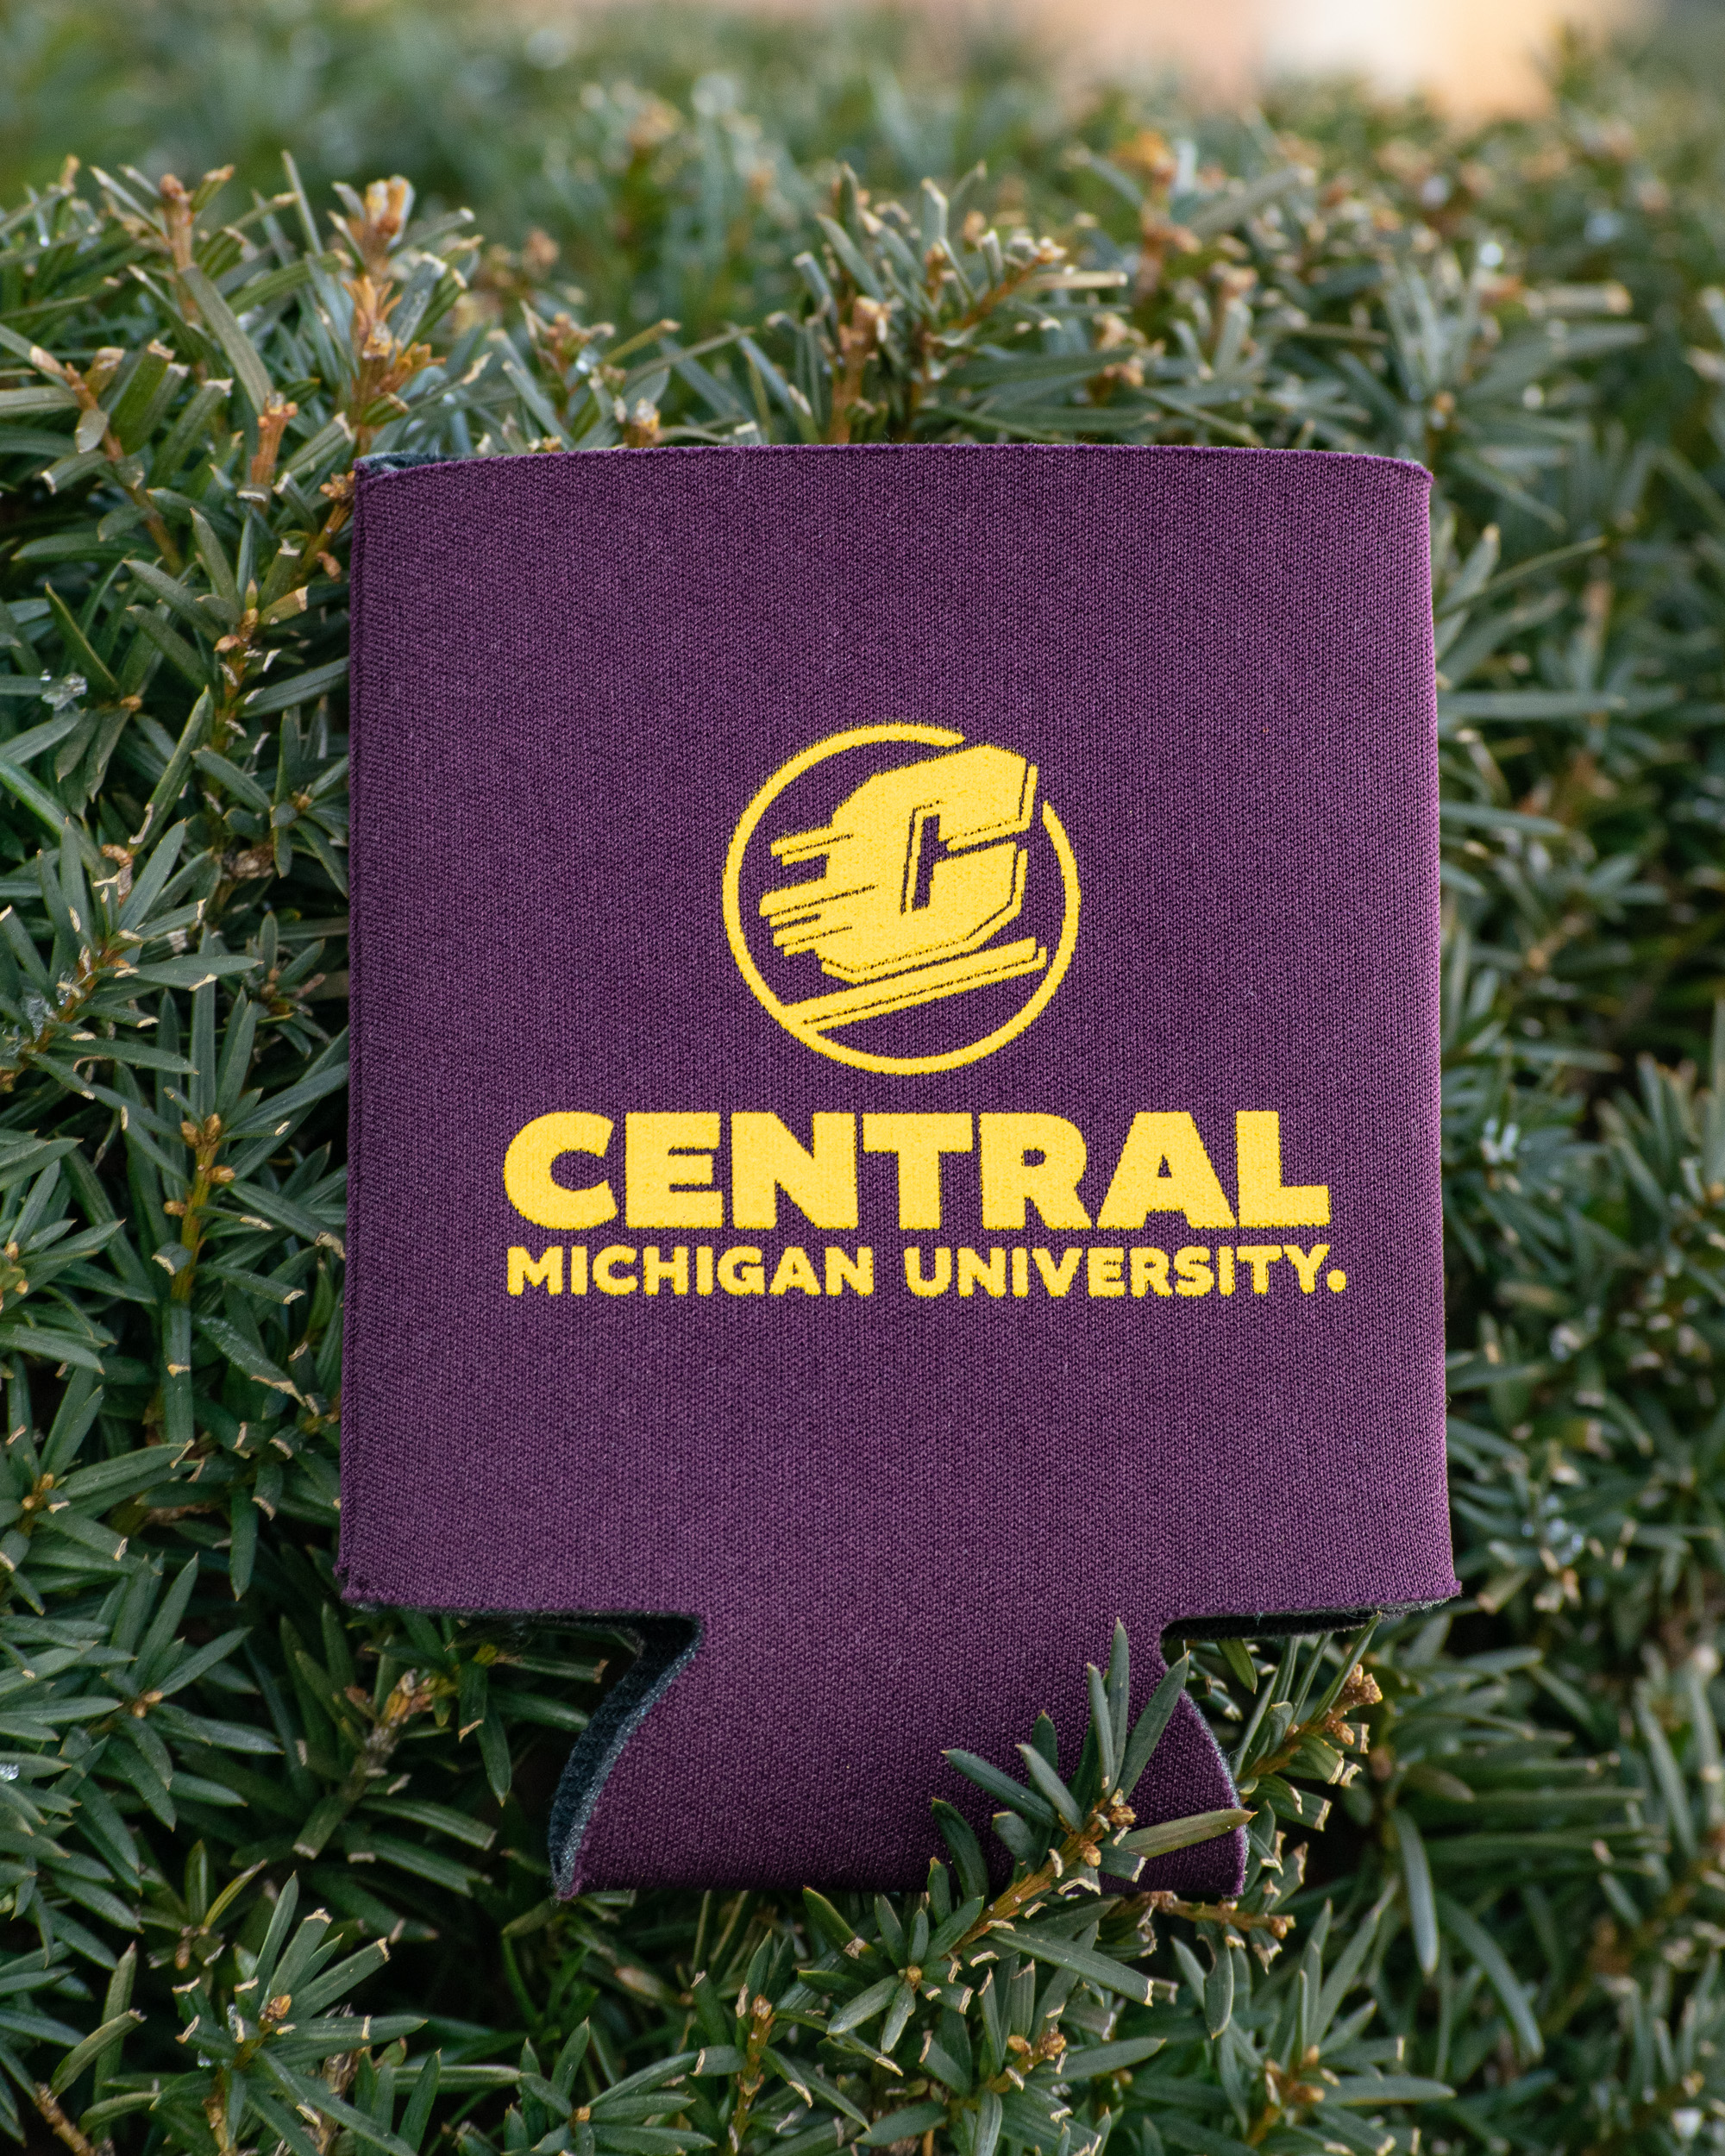 Action C Central Michigan University Maroon Can Koozie (SKU 5051380298)